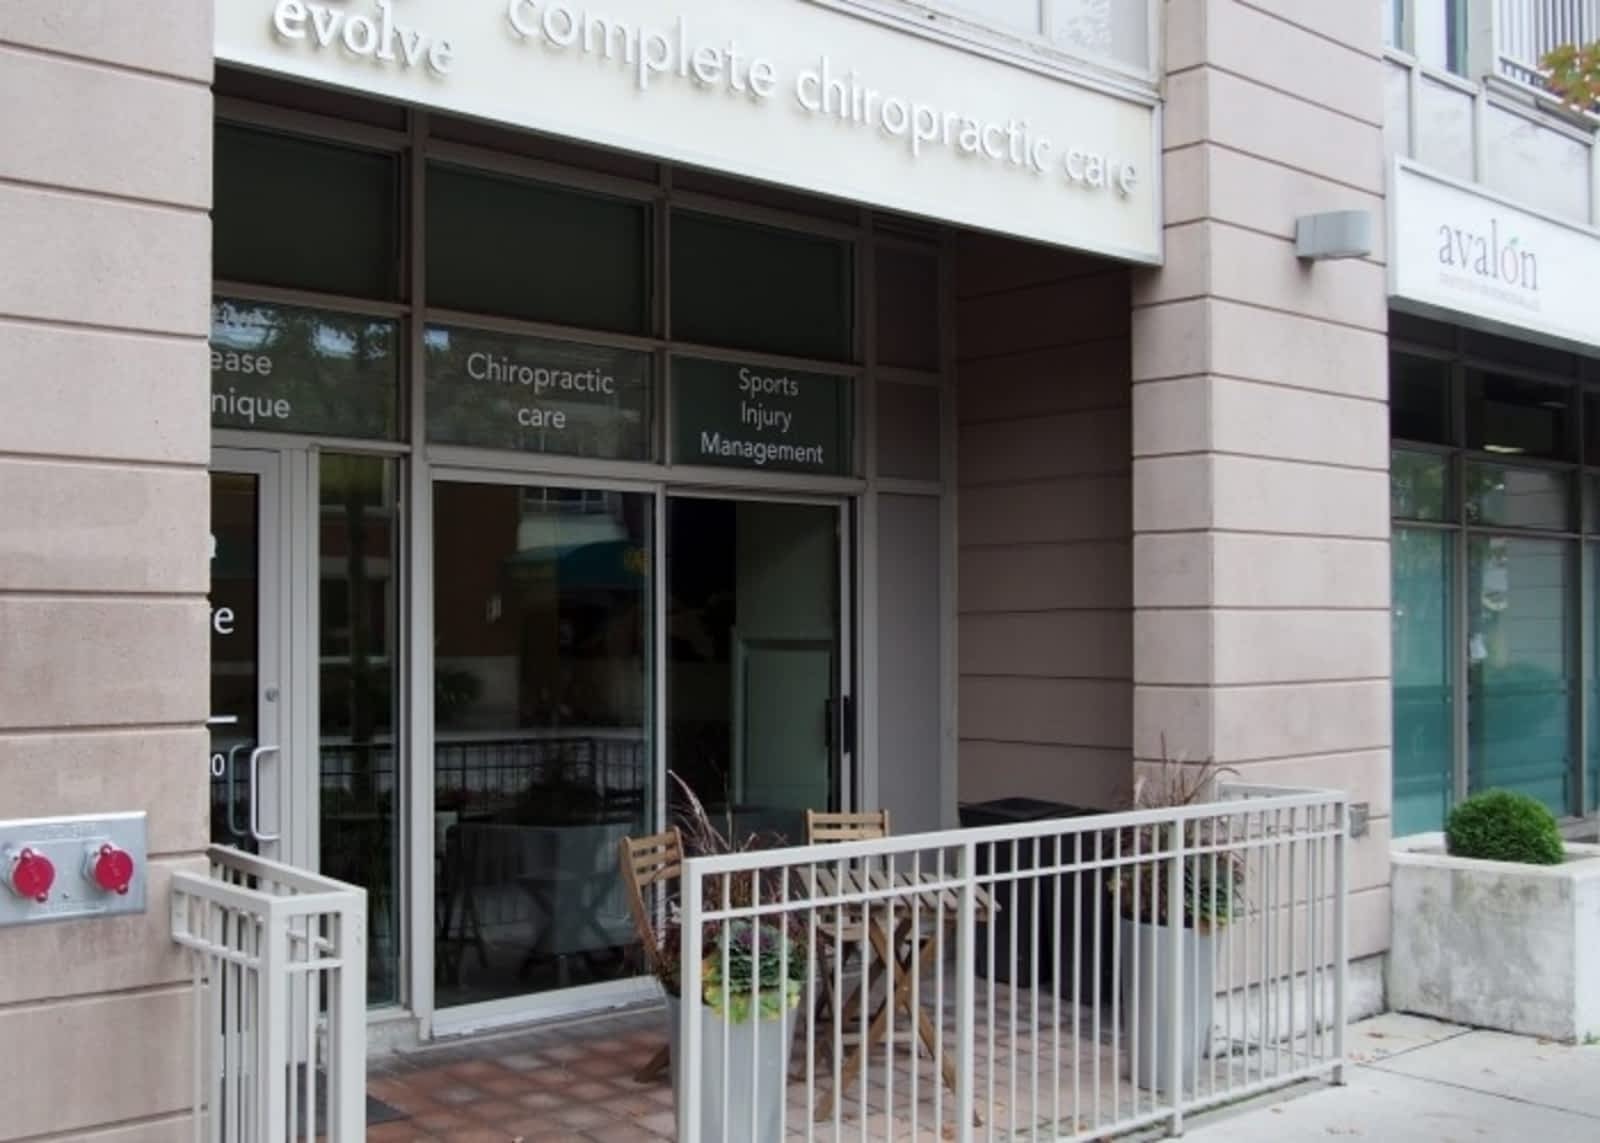 Evolve Complete Chiropractic Care